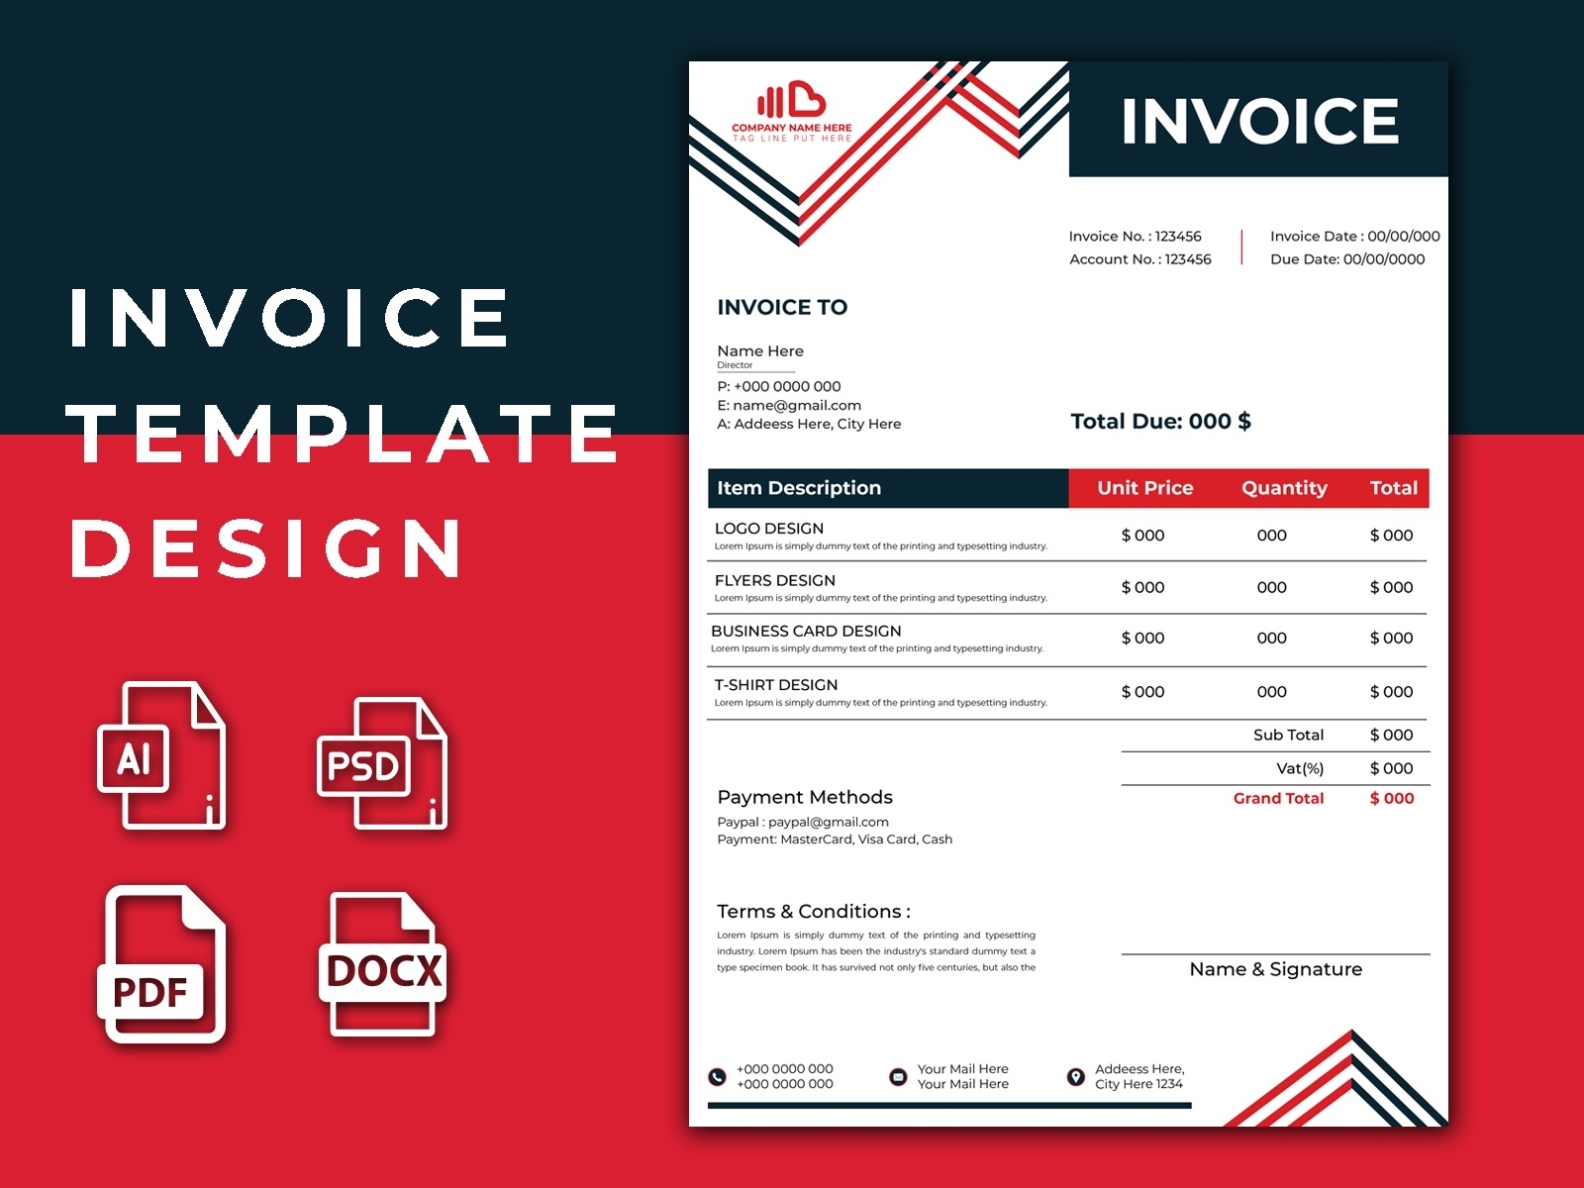 Creative Invoice Template Design By Rasel'S Design On Dribbble Within Media Invoice Template